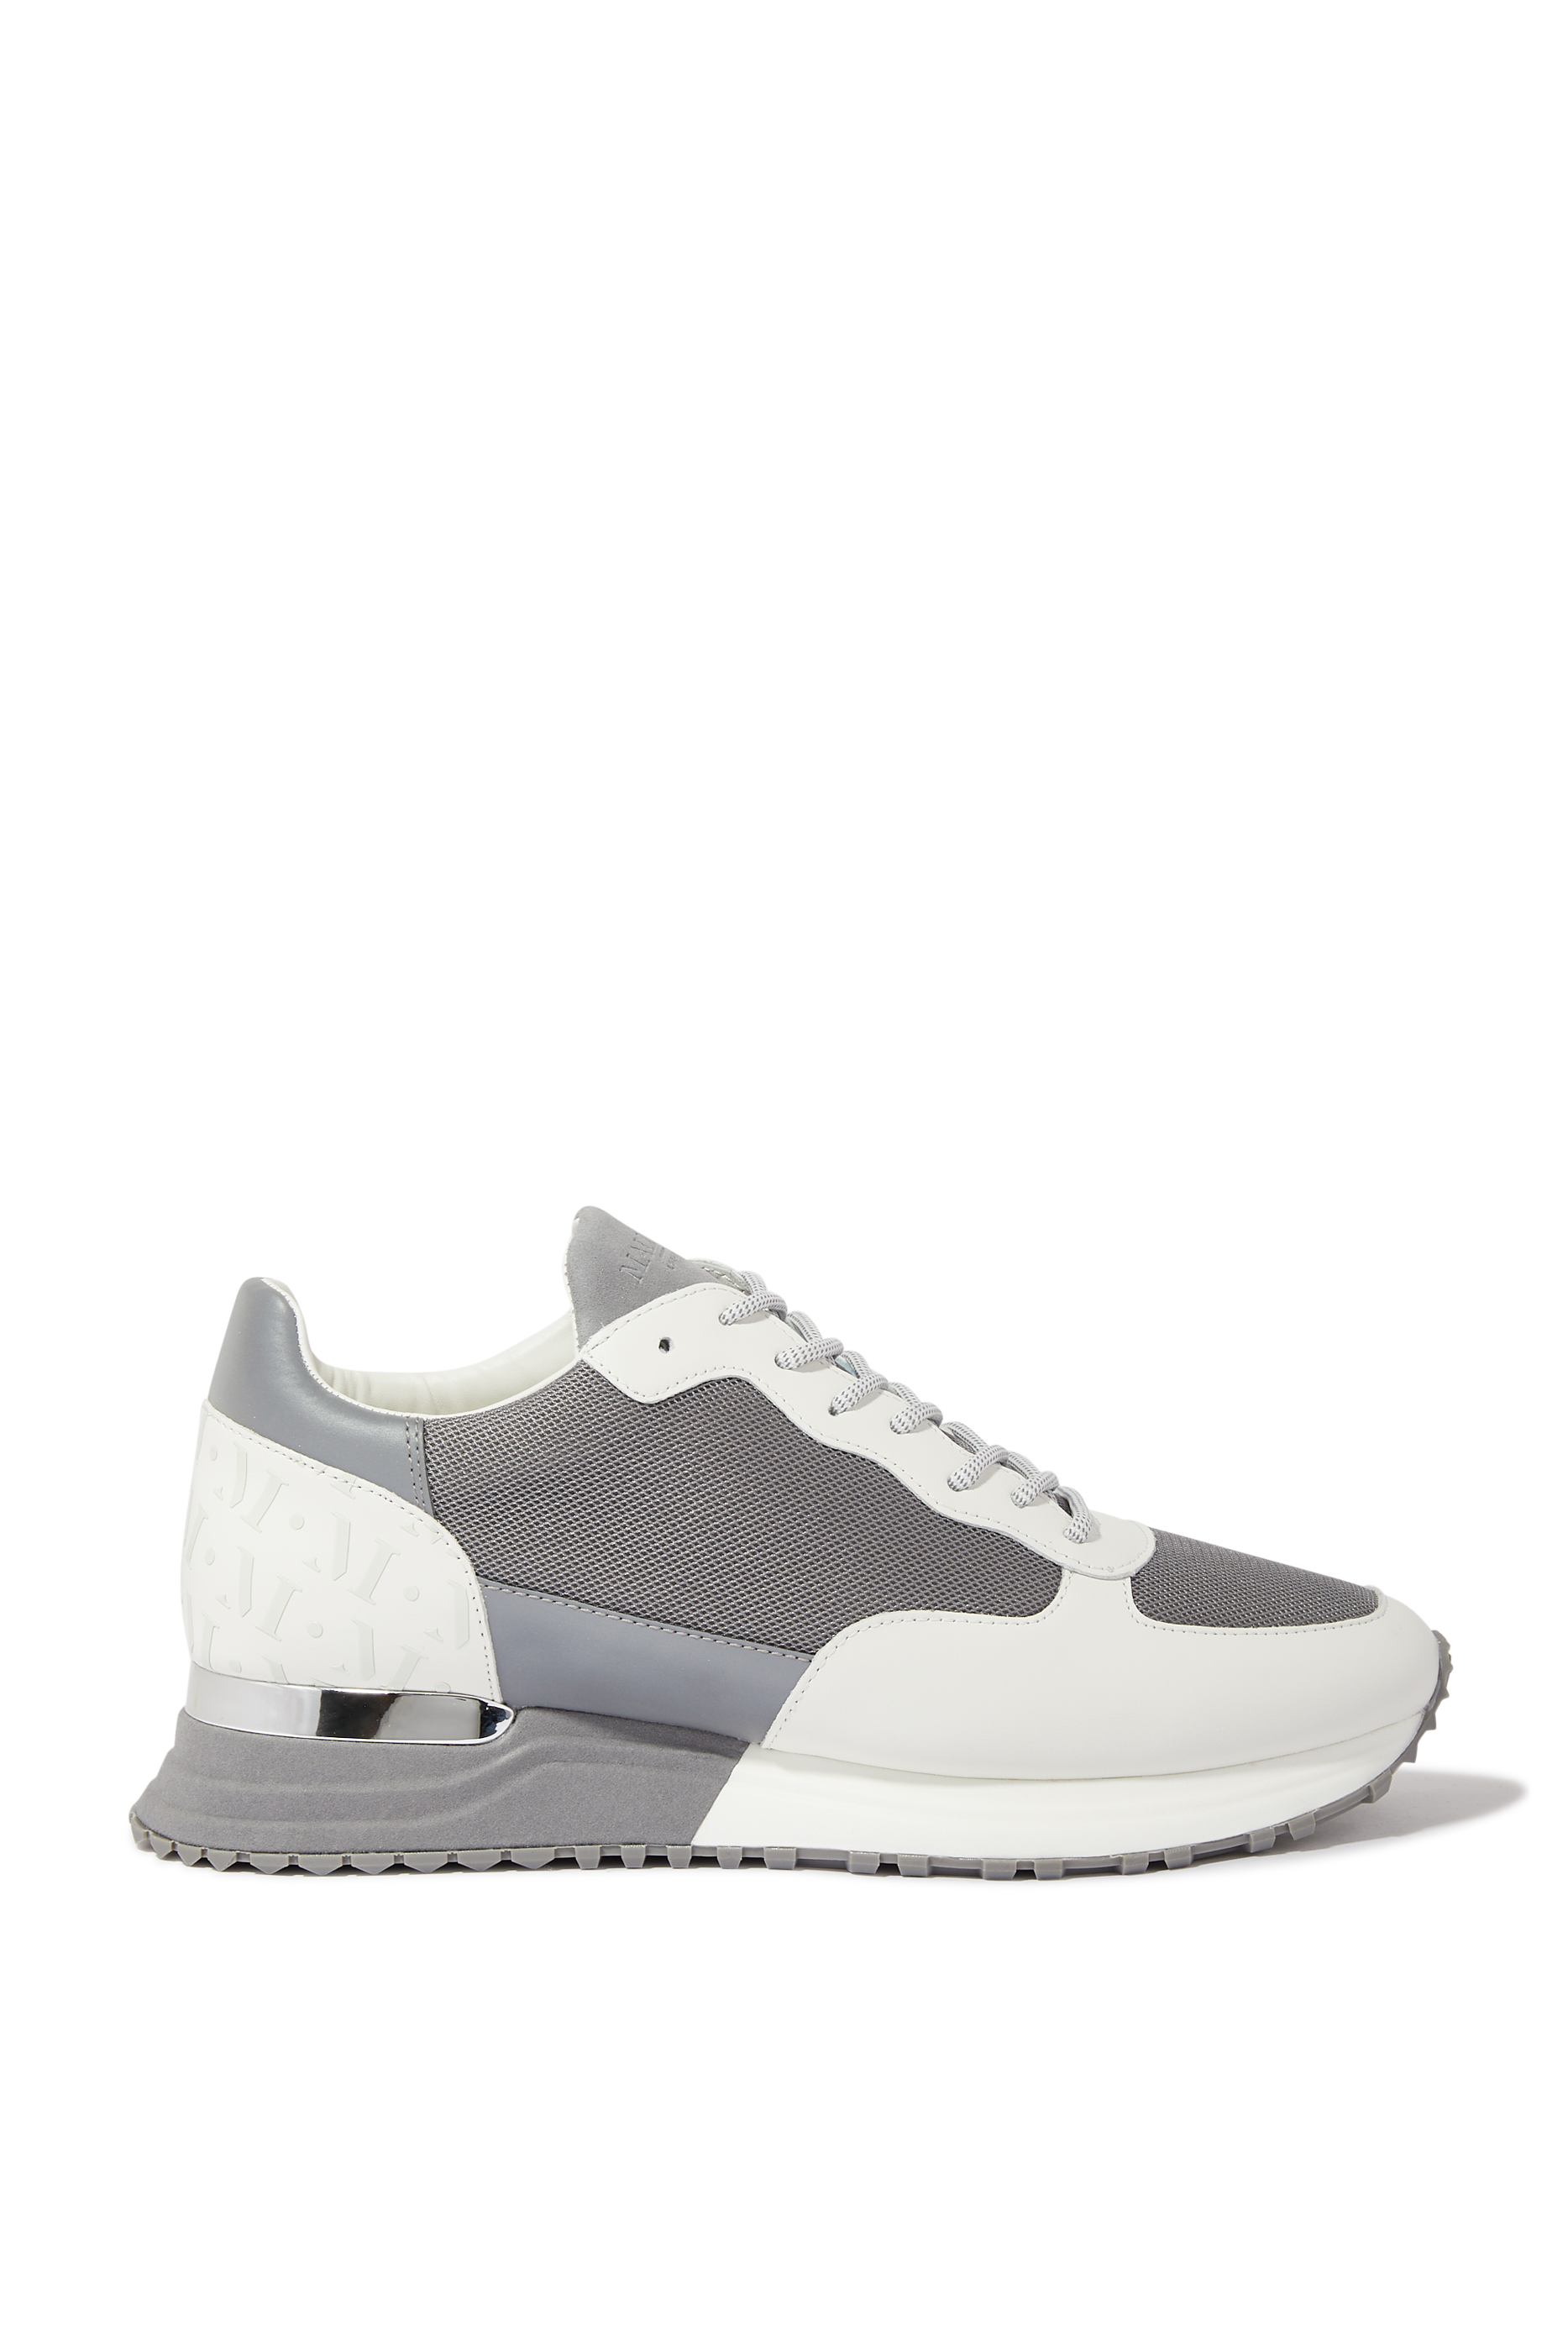 Buy Mallet Popham Monochrome Reflect Sneakers for Mens | Bloomingdale's ...